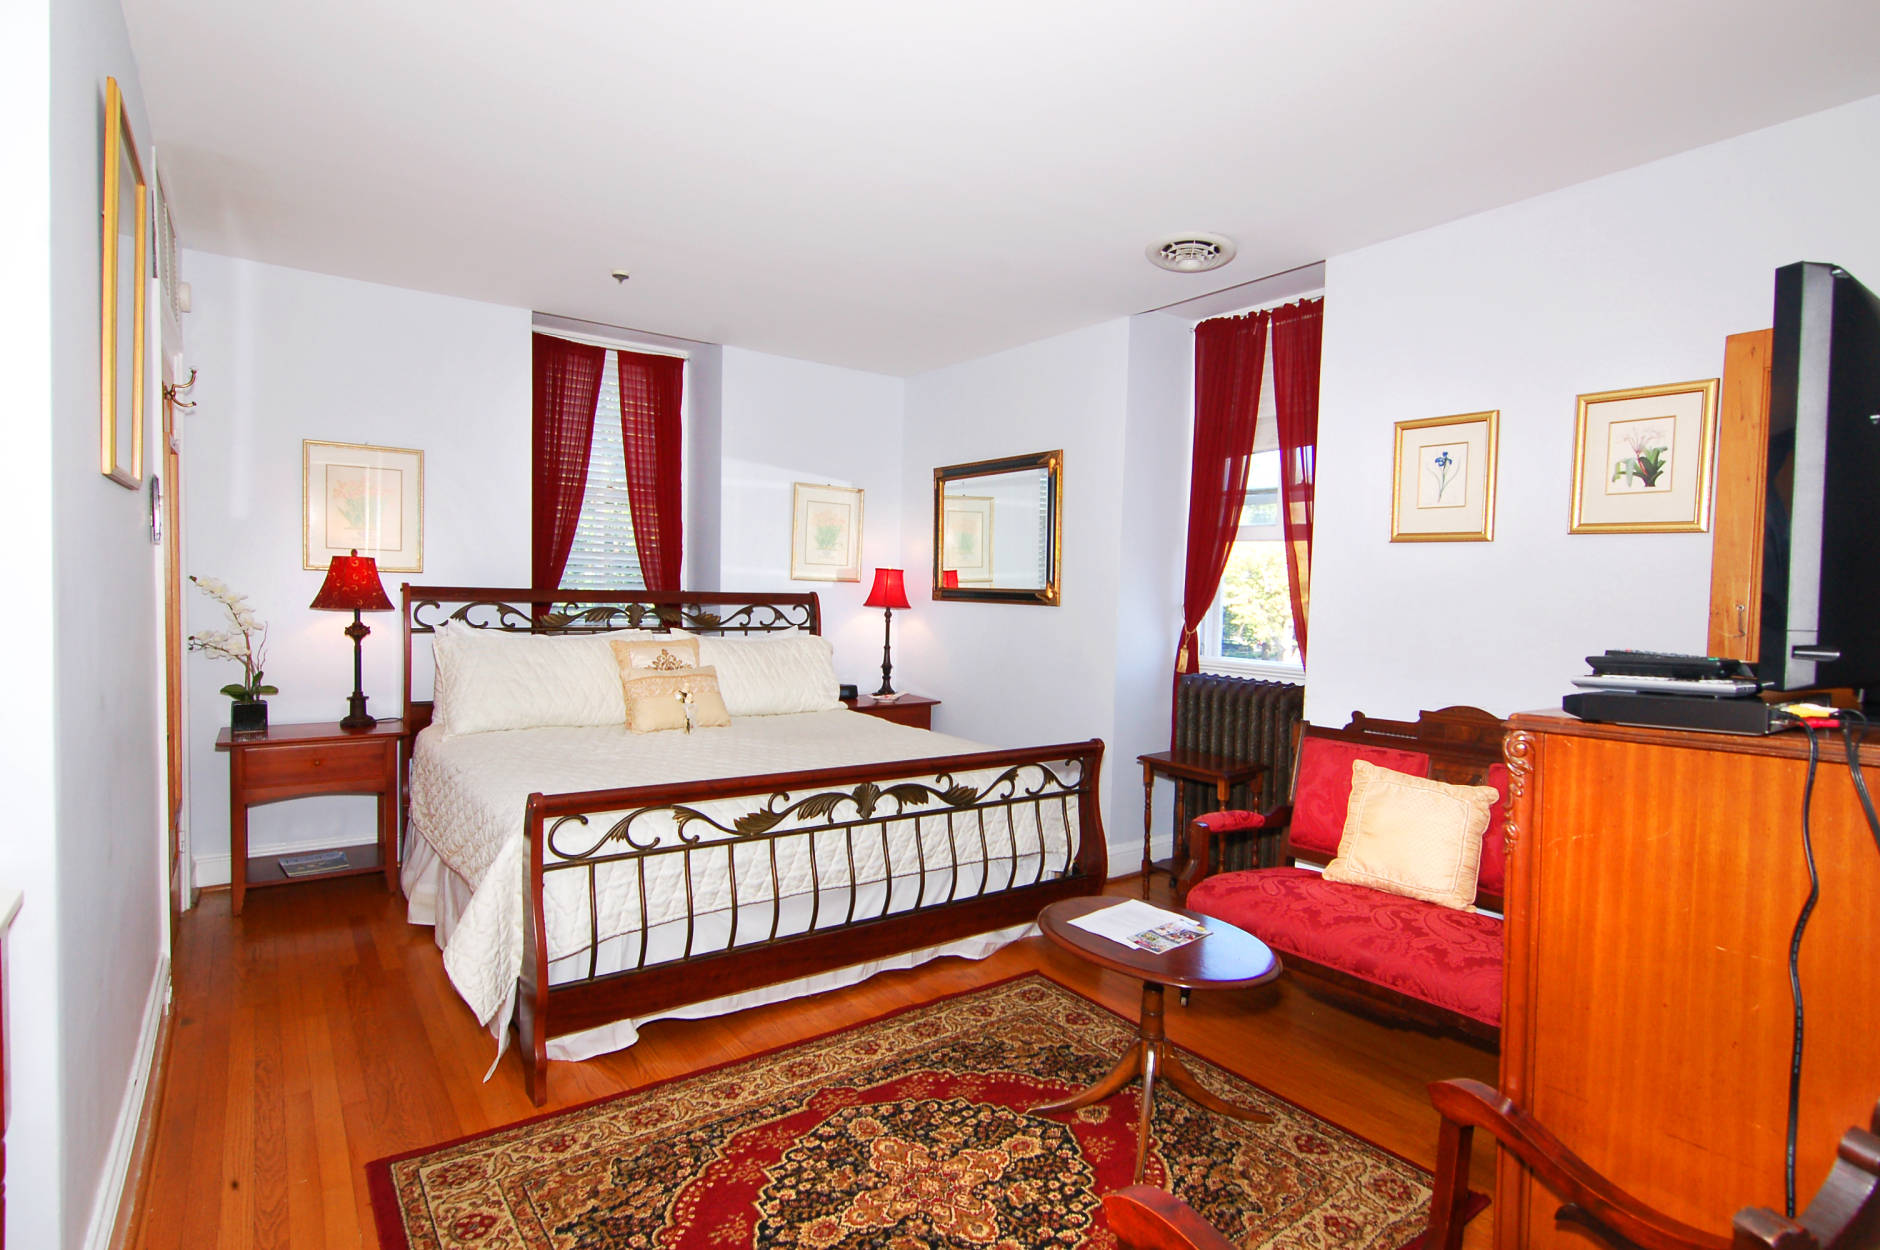 The inn includes original wainscoting, millwork mantels and hardwood floors. 
(Courtesy Chesapeake Pro Photo)